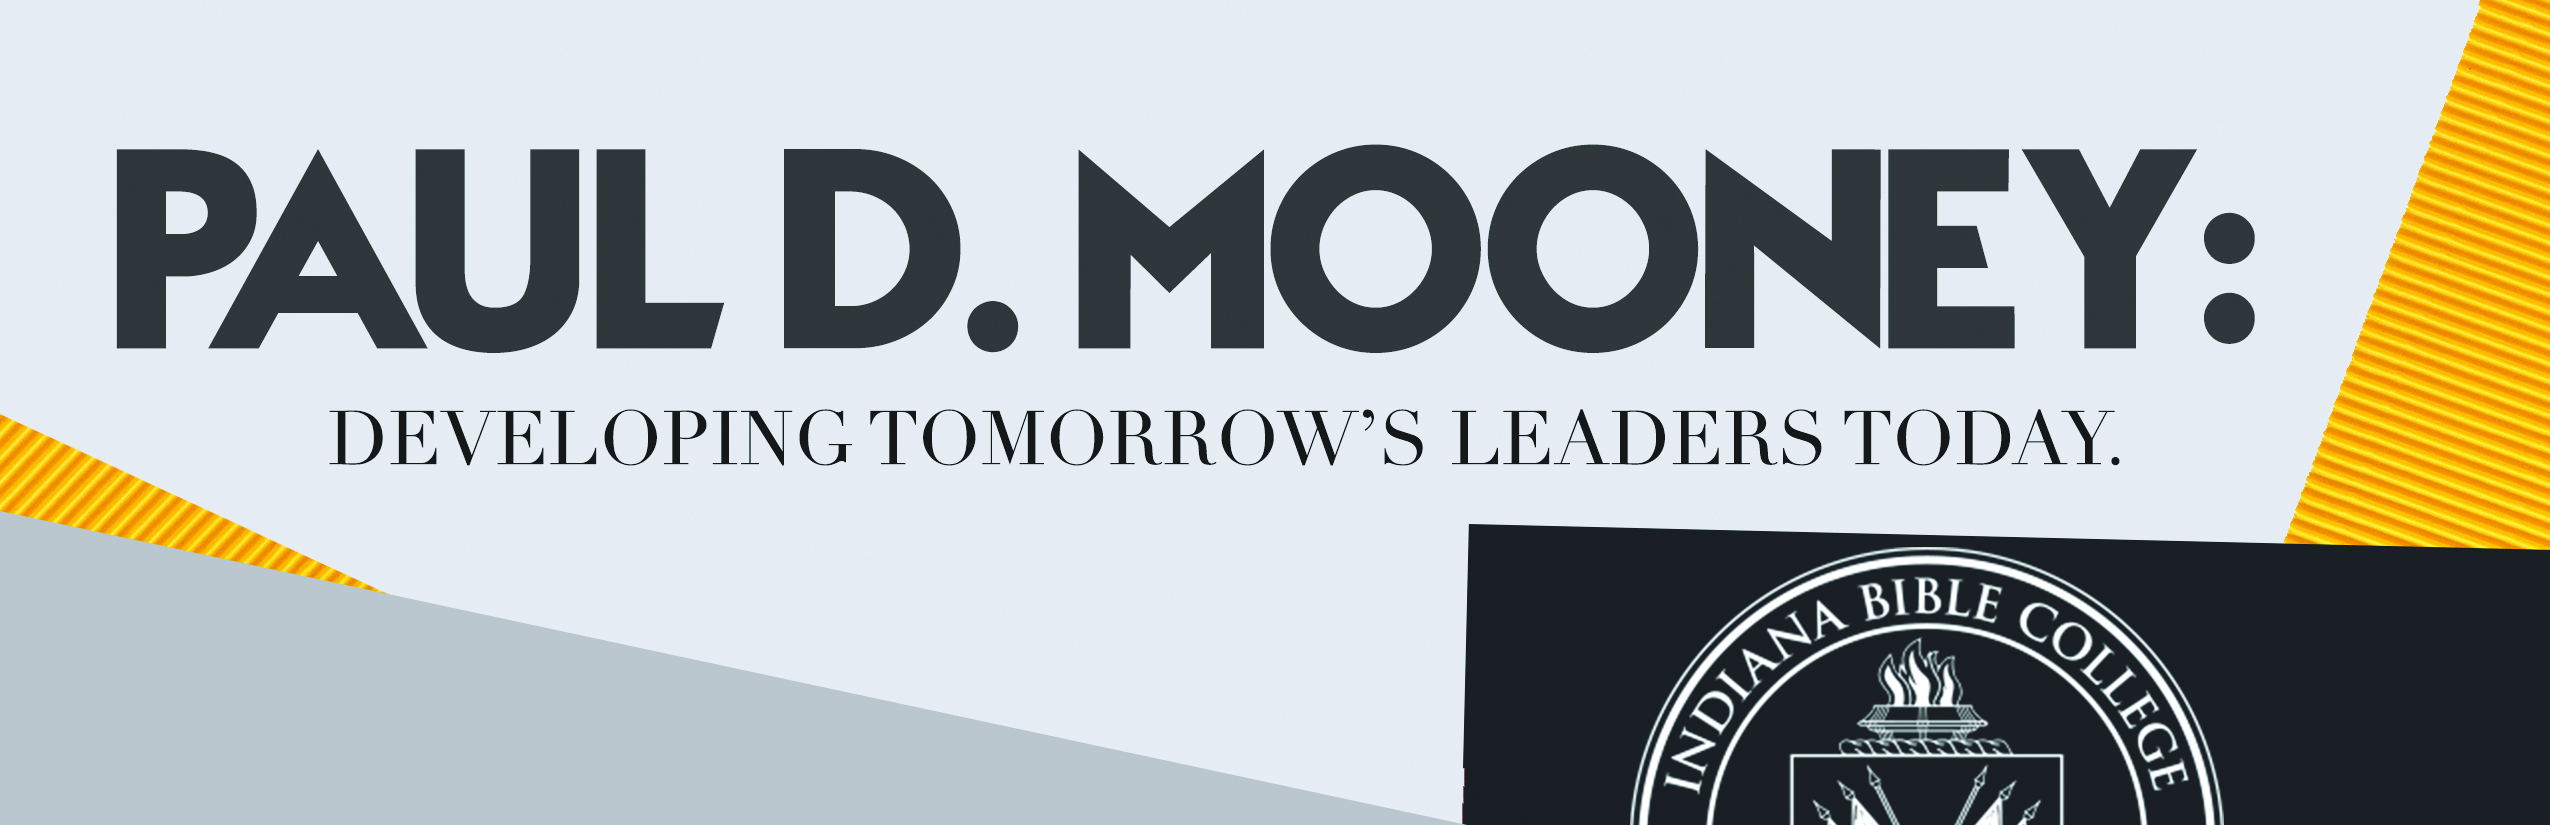 Paul D. Mooney: Developing Tomorrow’s Leaders Today